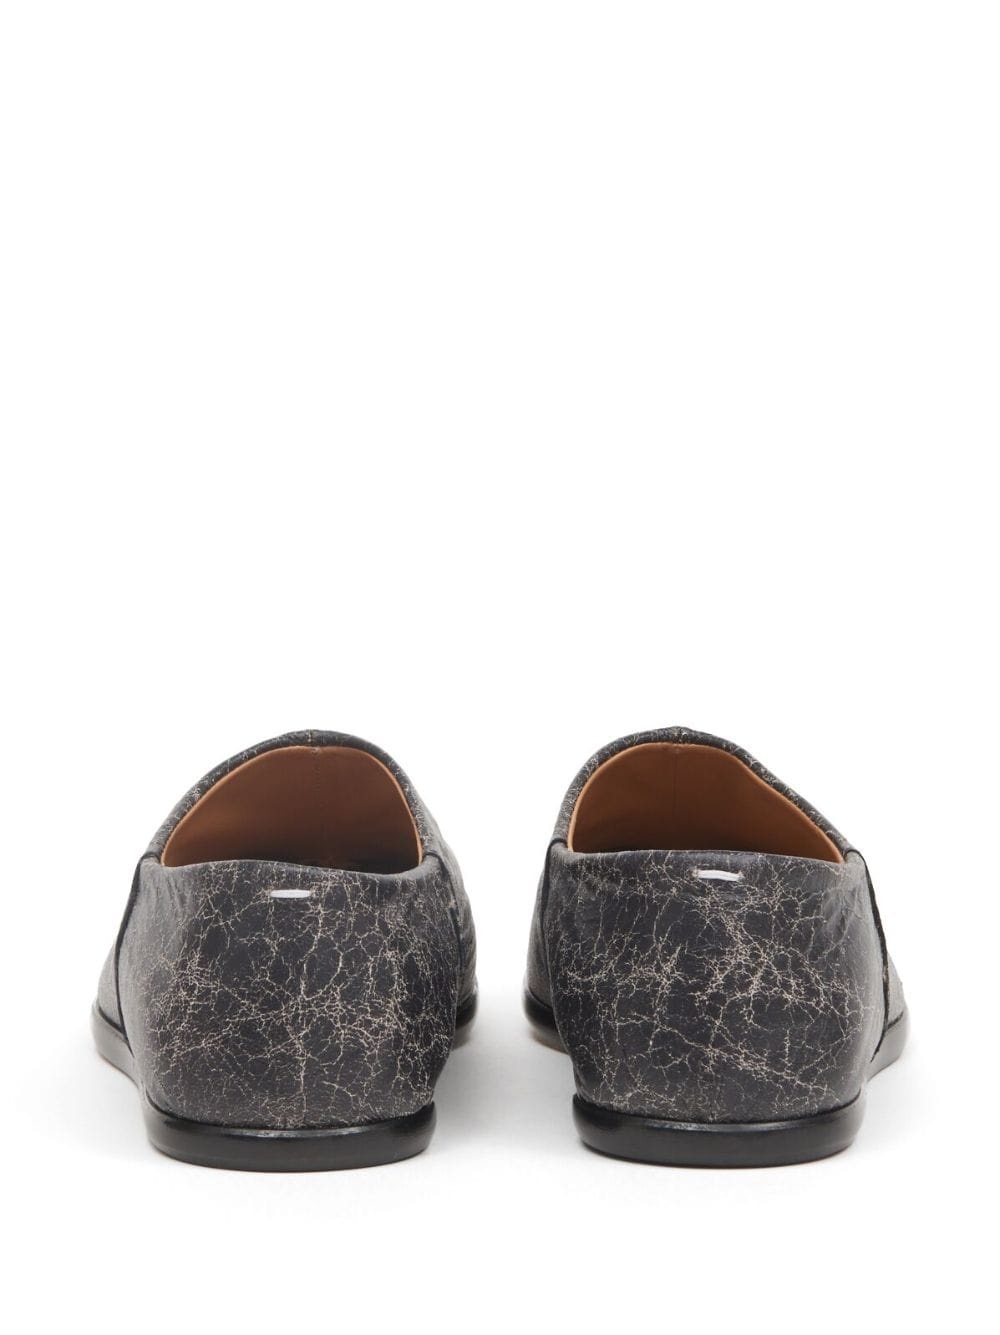 Tabi leather slip-on shoes - 4